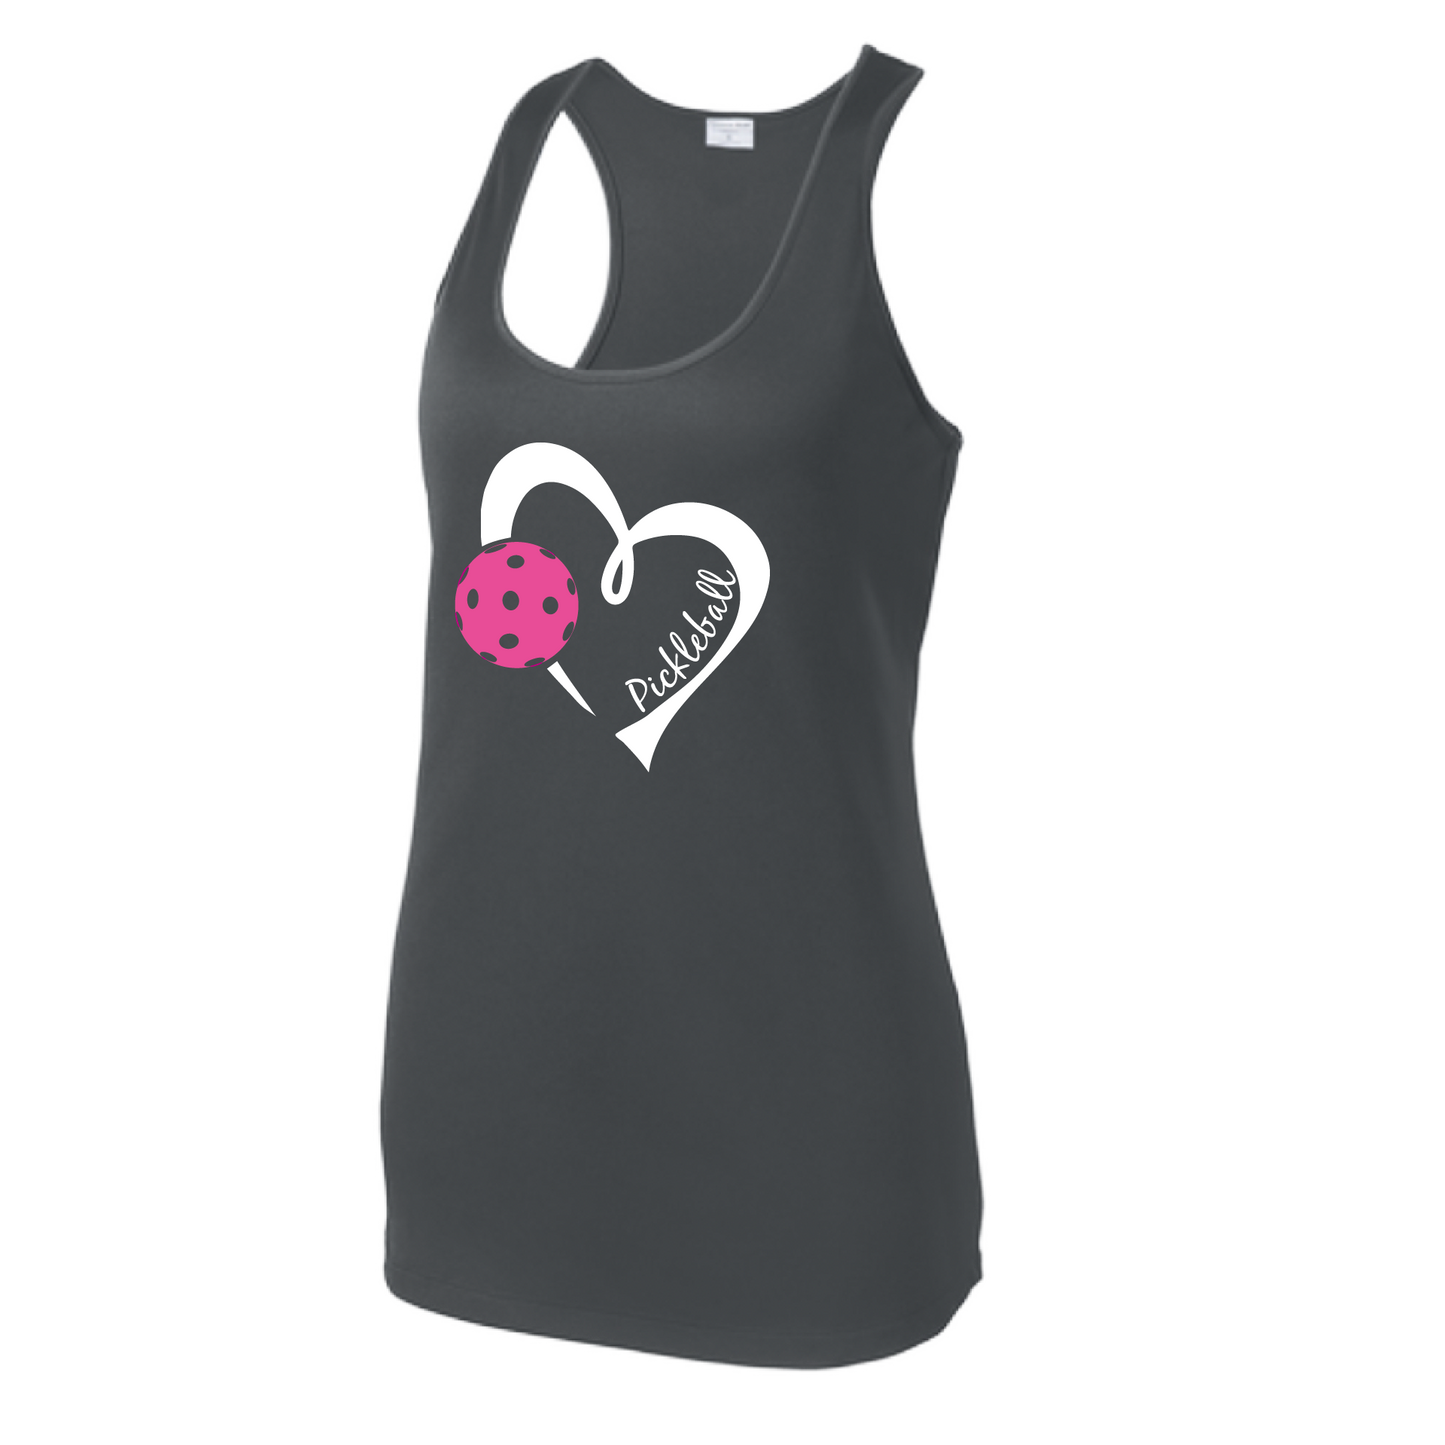 Pickleball Design: Heart with Pickleball  Women's Style: Racerback Tank  Turn up the volume in this Women's shirt with its perfect mix of softness and attitude. Material is ultra-comfortable with moisture wicking properties and tri-blend softness. PosiCharge technology locks in color. Highly breathable and lightweight.